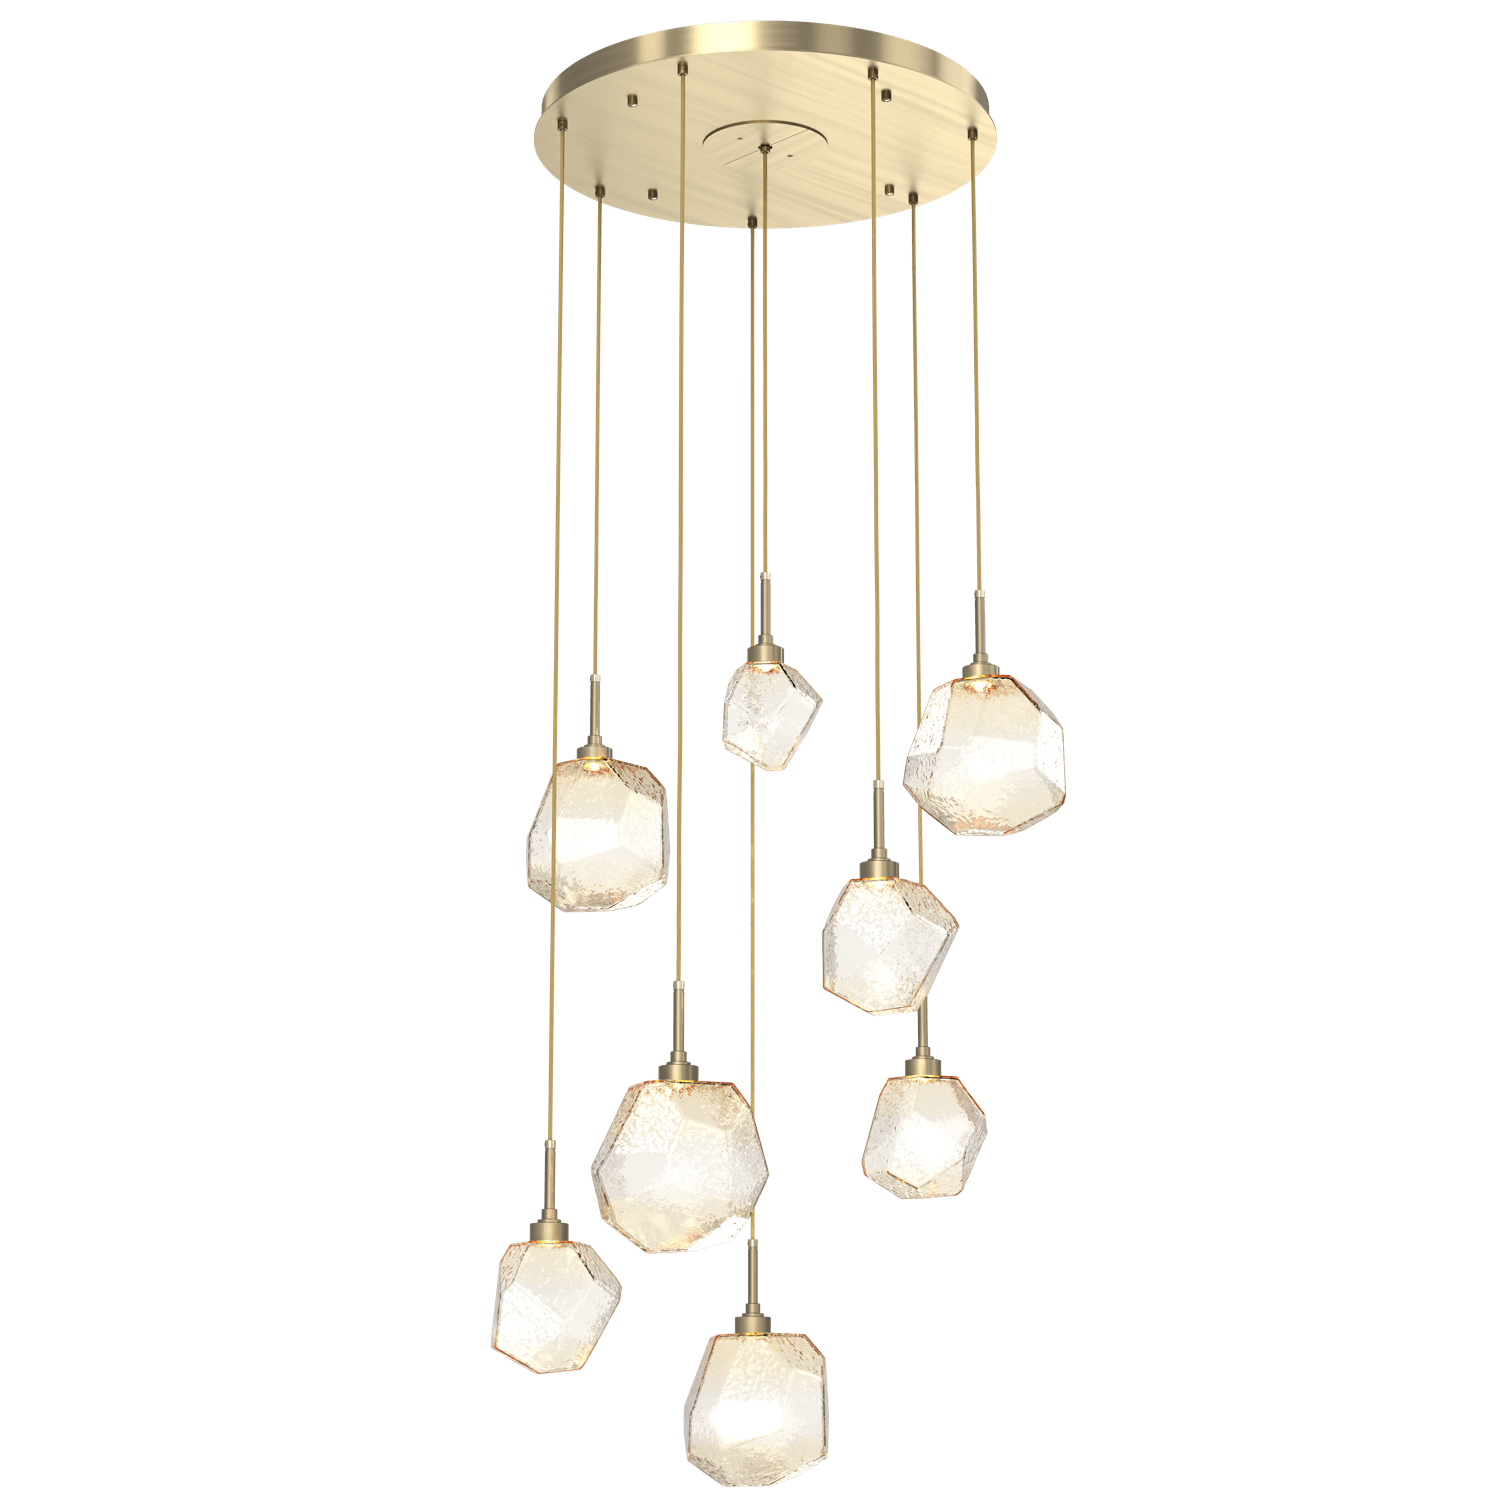 CHB0039-08-HB-A-Hammerton-Studio-Gem-8-light-round-pendant-chandelier-with-heritage-brass-finish-and-amber-blown-glass-shades-and-LED-lamping